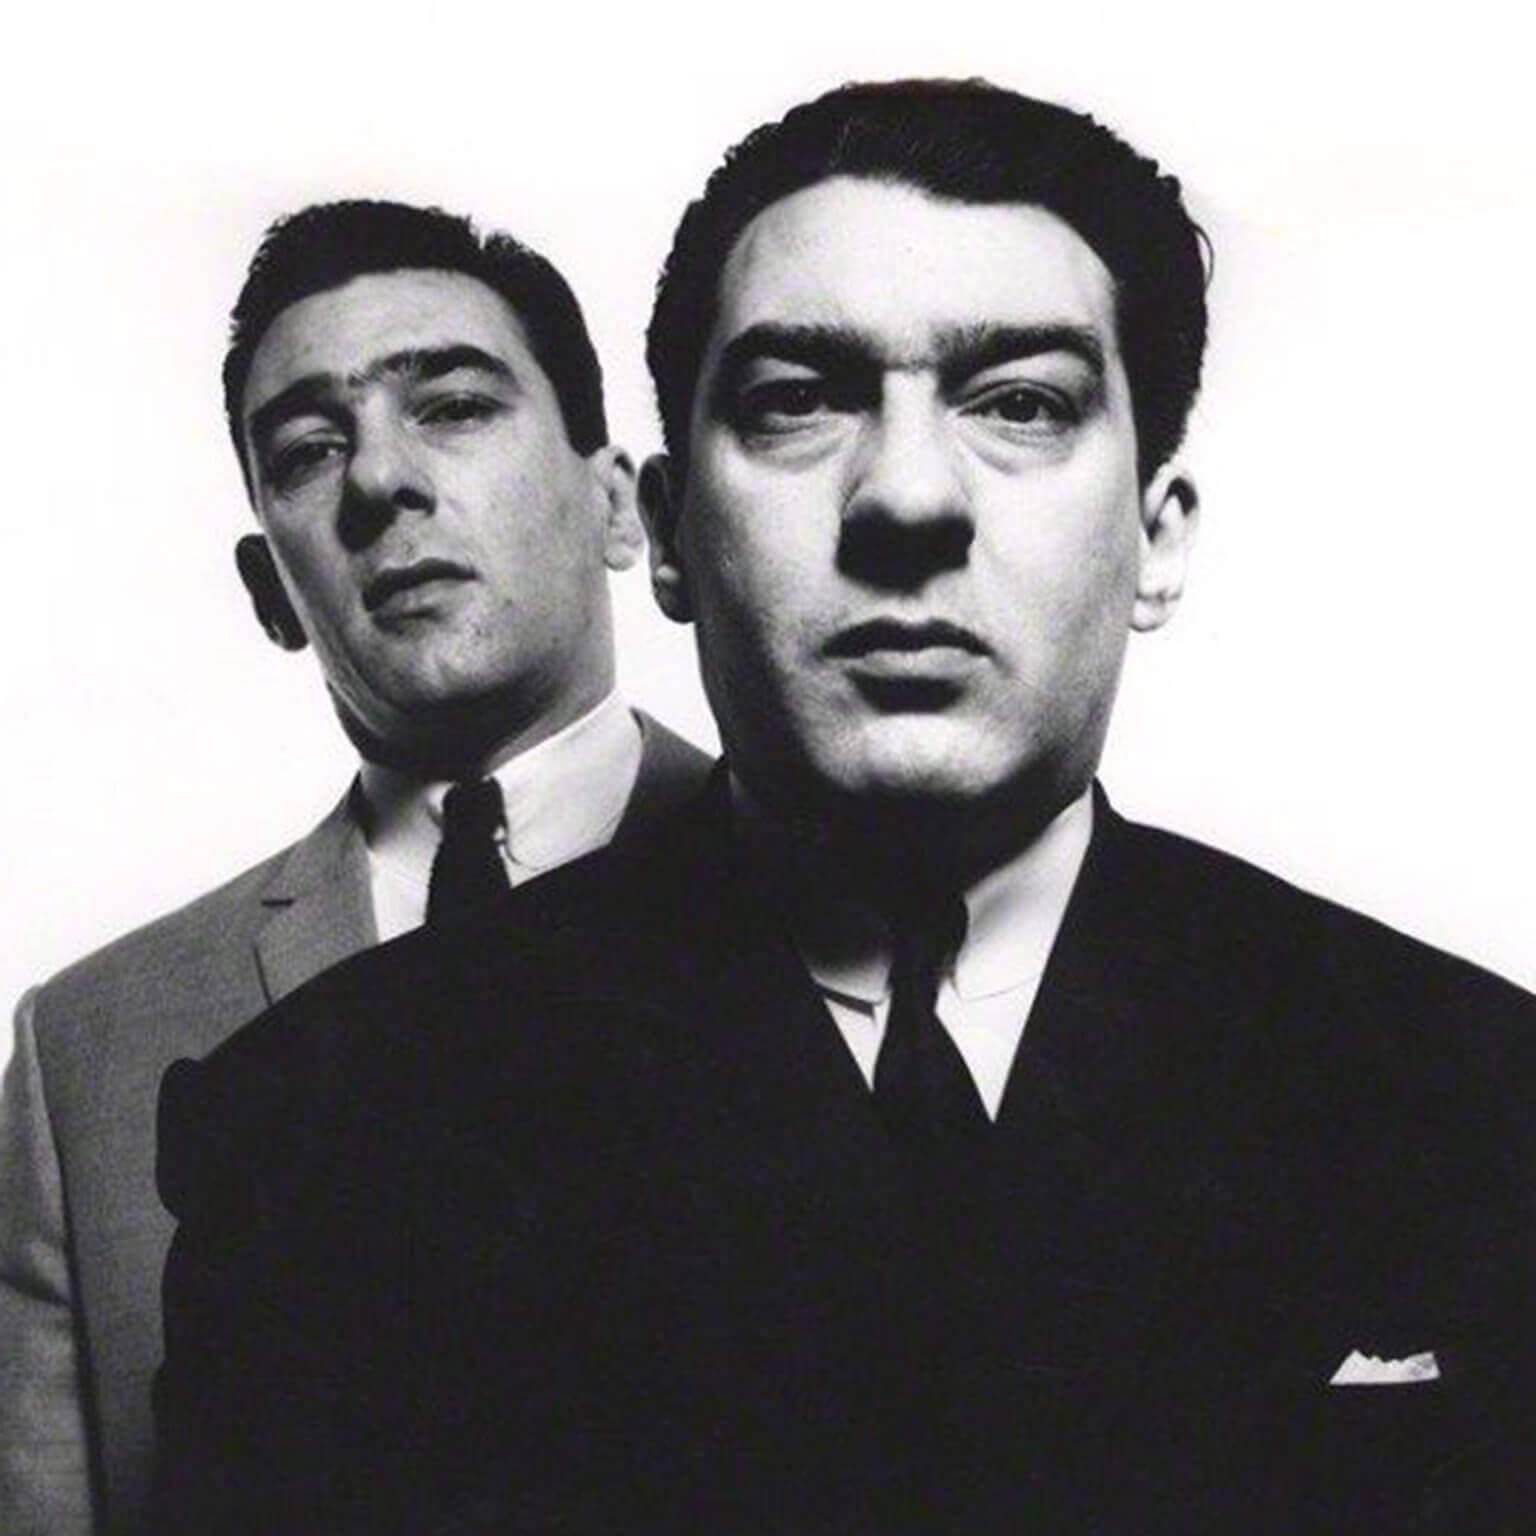 The Kray Twins: Let's Get Kray Kray - Unfortunate History